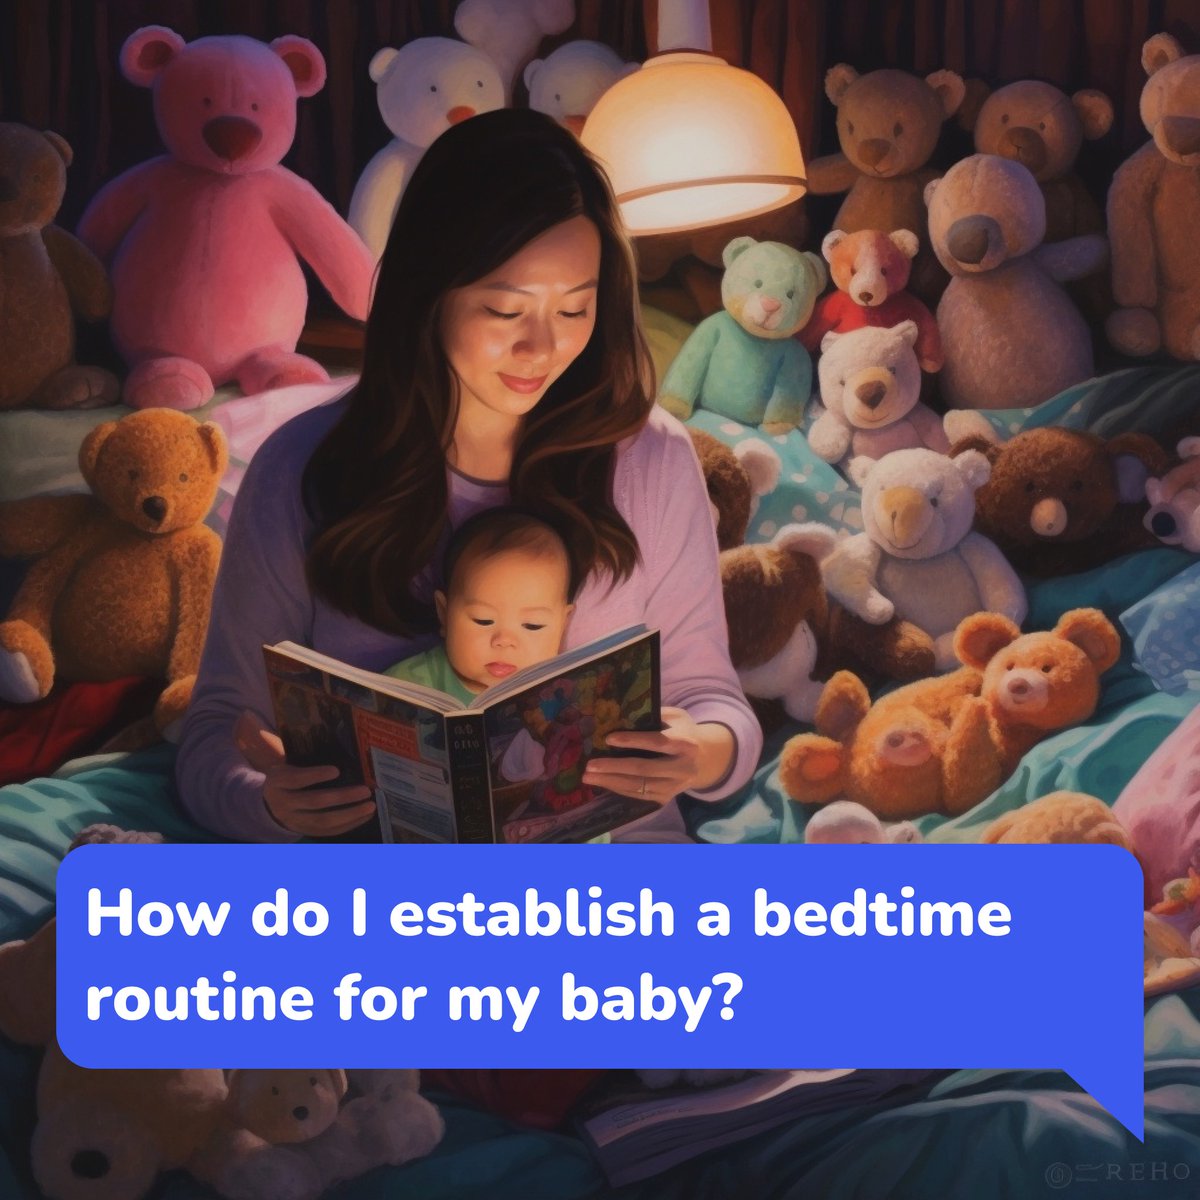 Creating a bedtime routine for your baby can help promote healthy sleep habits. Here are some tips to get started! 💤 #BedtimeRoutines #SleepTraining #BabySleep #HealthyHabits #ParentingTips